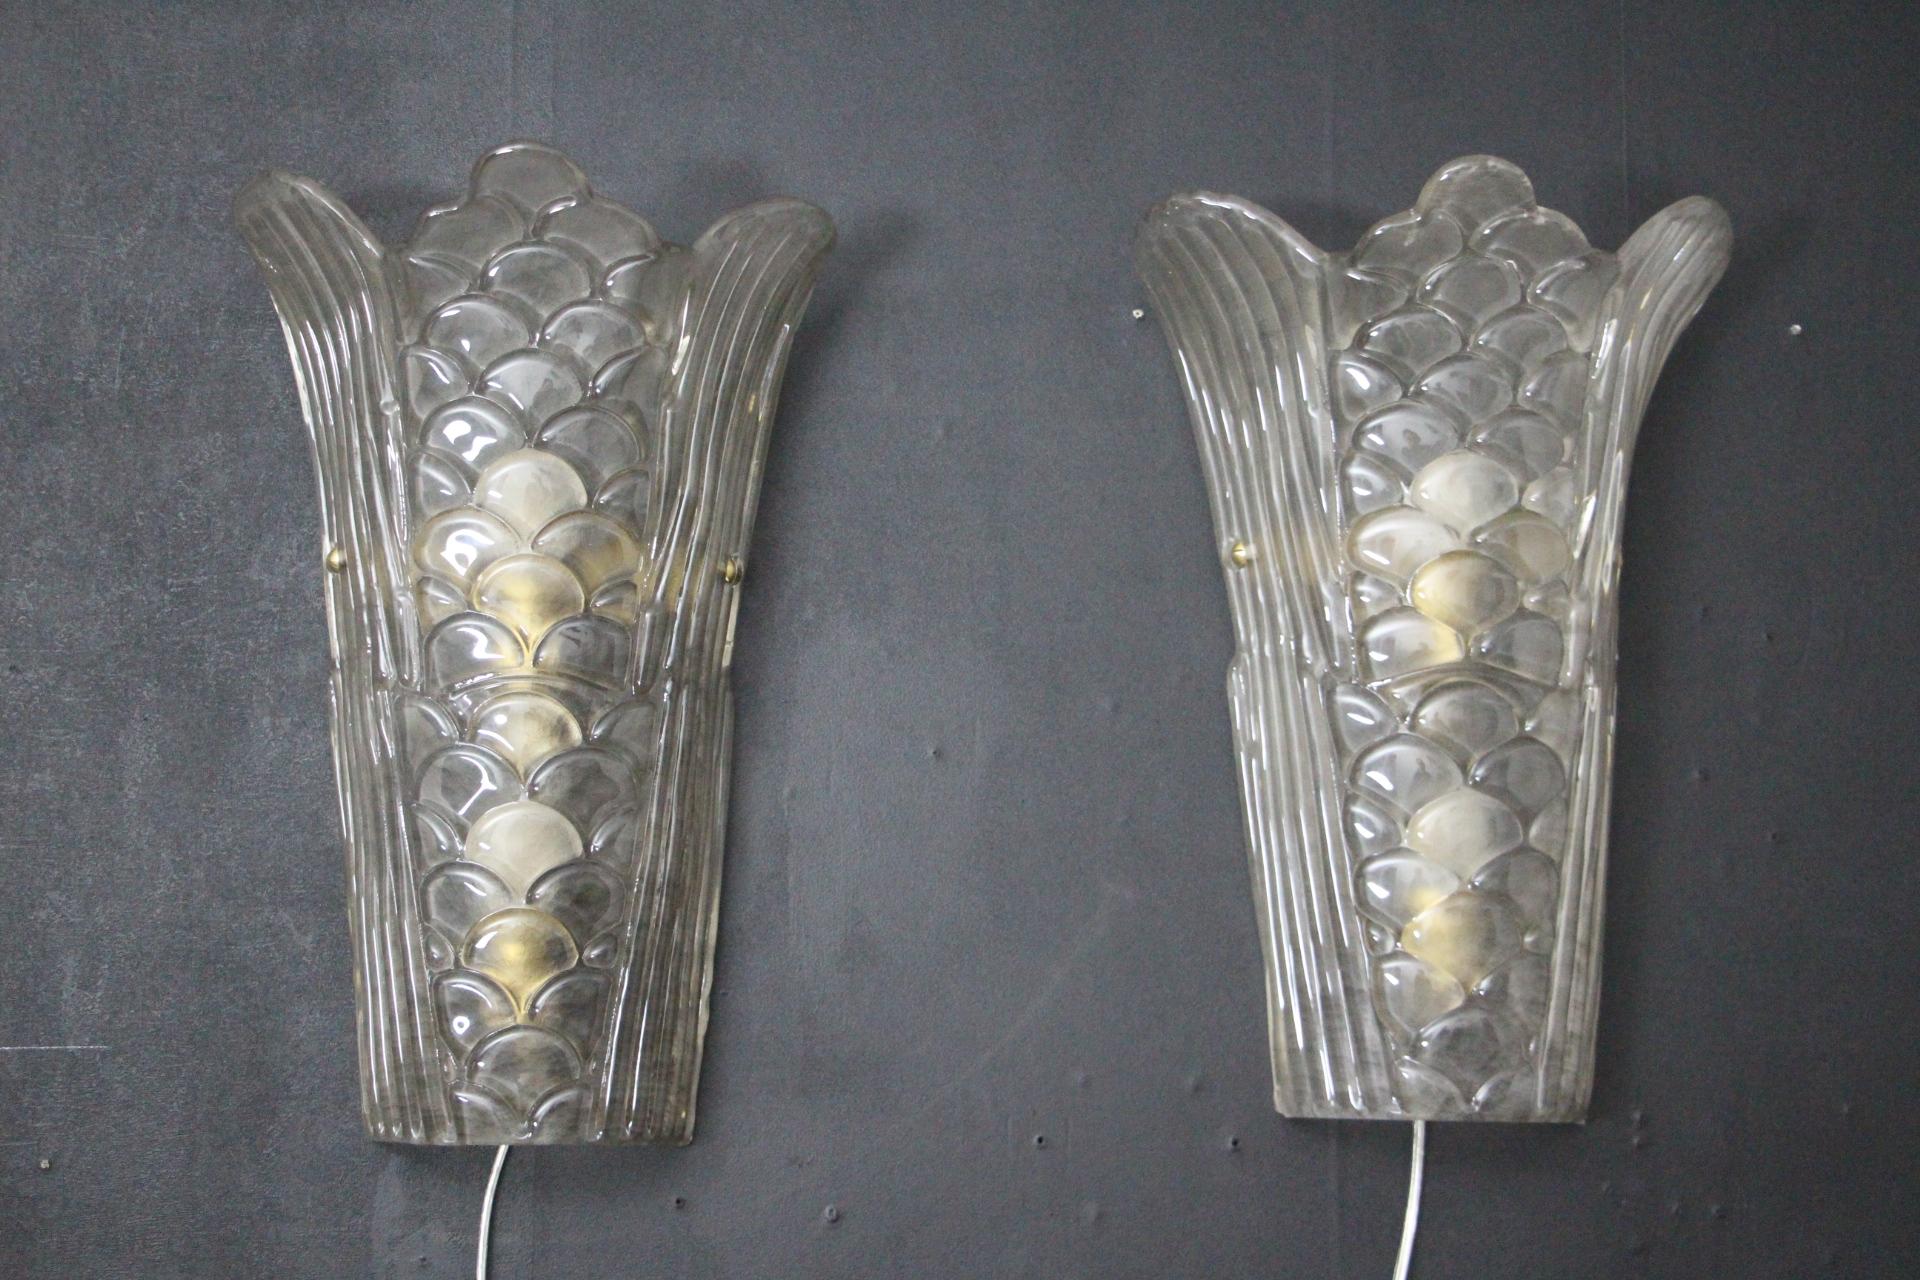 This pair pair of Art Deco wall sconces are in the style of 